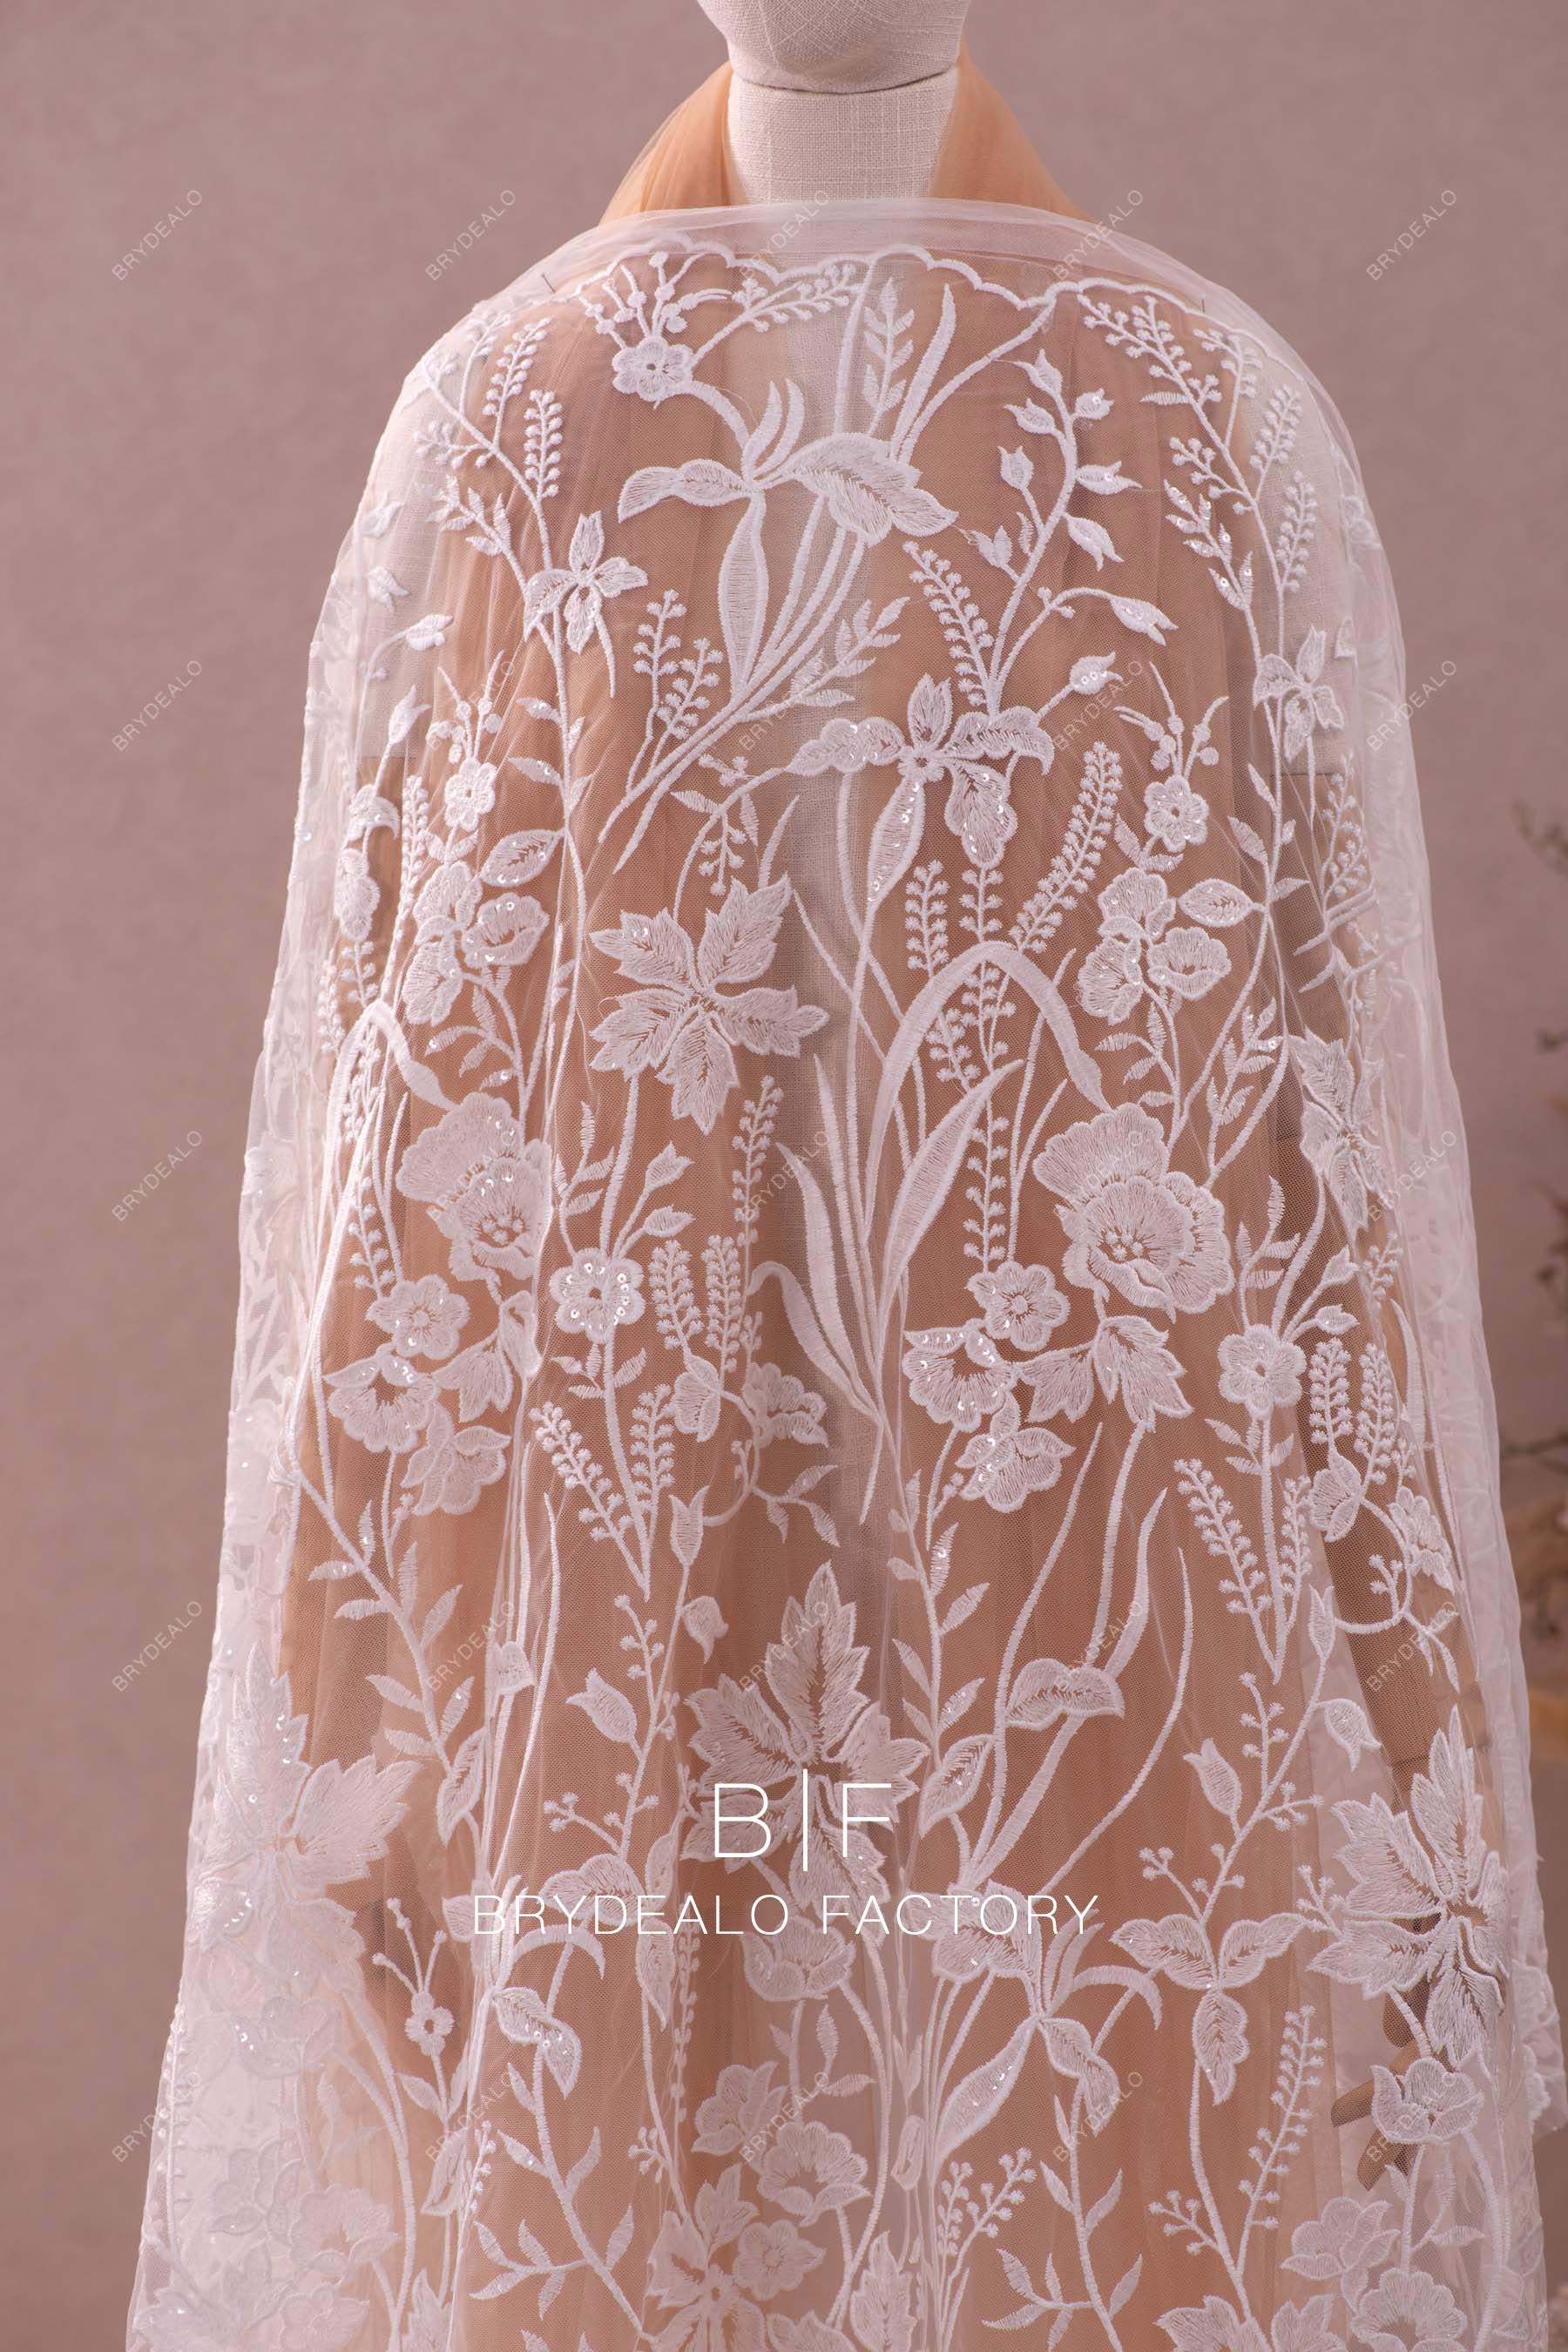 Clear Sequin Botanic Embroidery Wild Lace Fabric Online